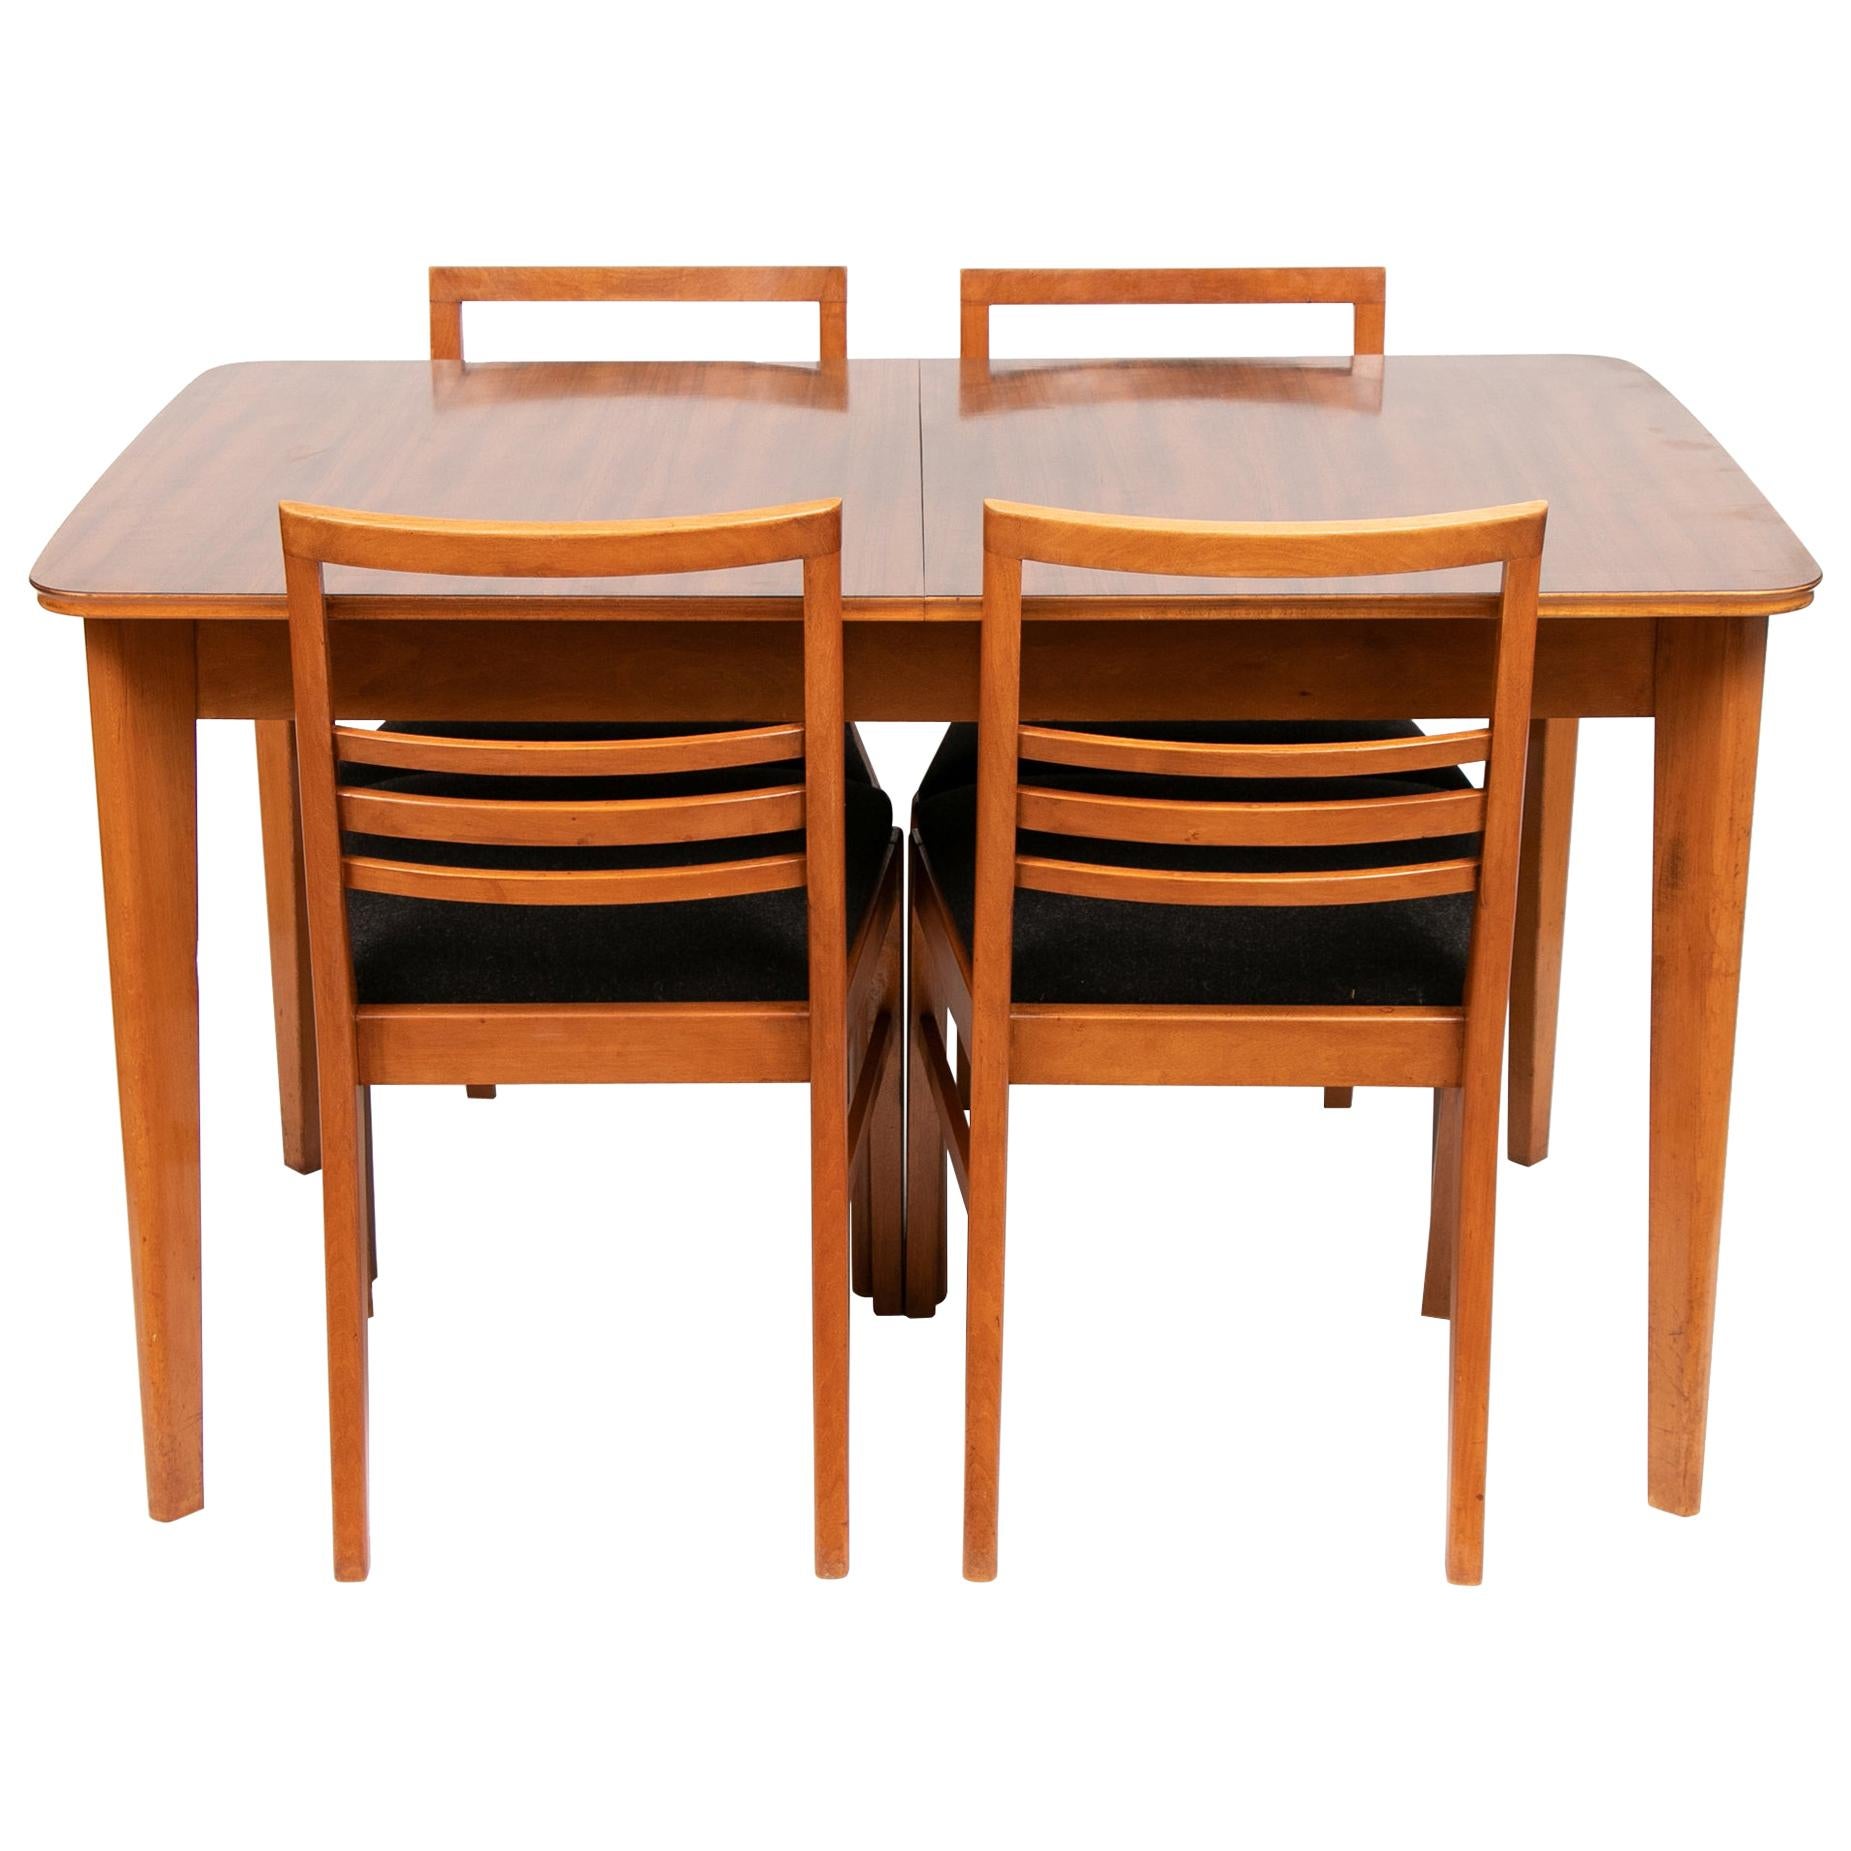 Midcentury Rosewood Dining Table and 4 Chairs by Gordon Russell, circa 1960 For Sale